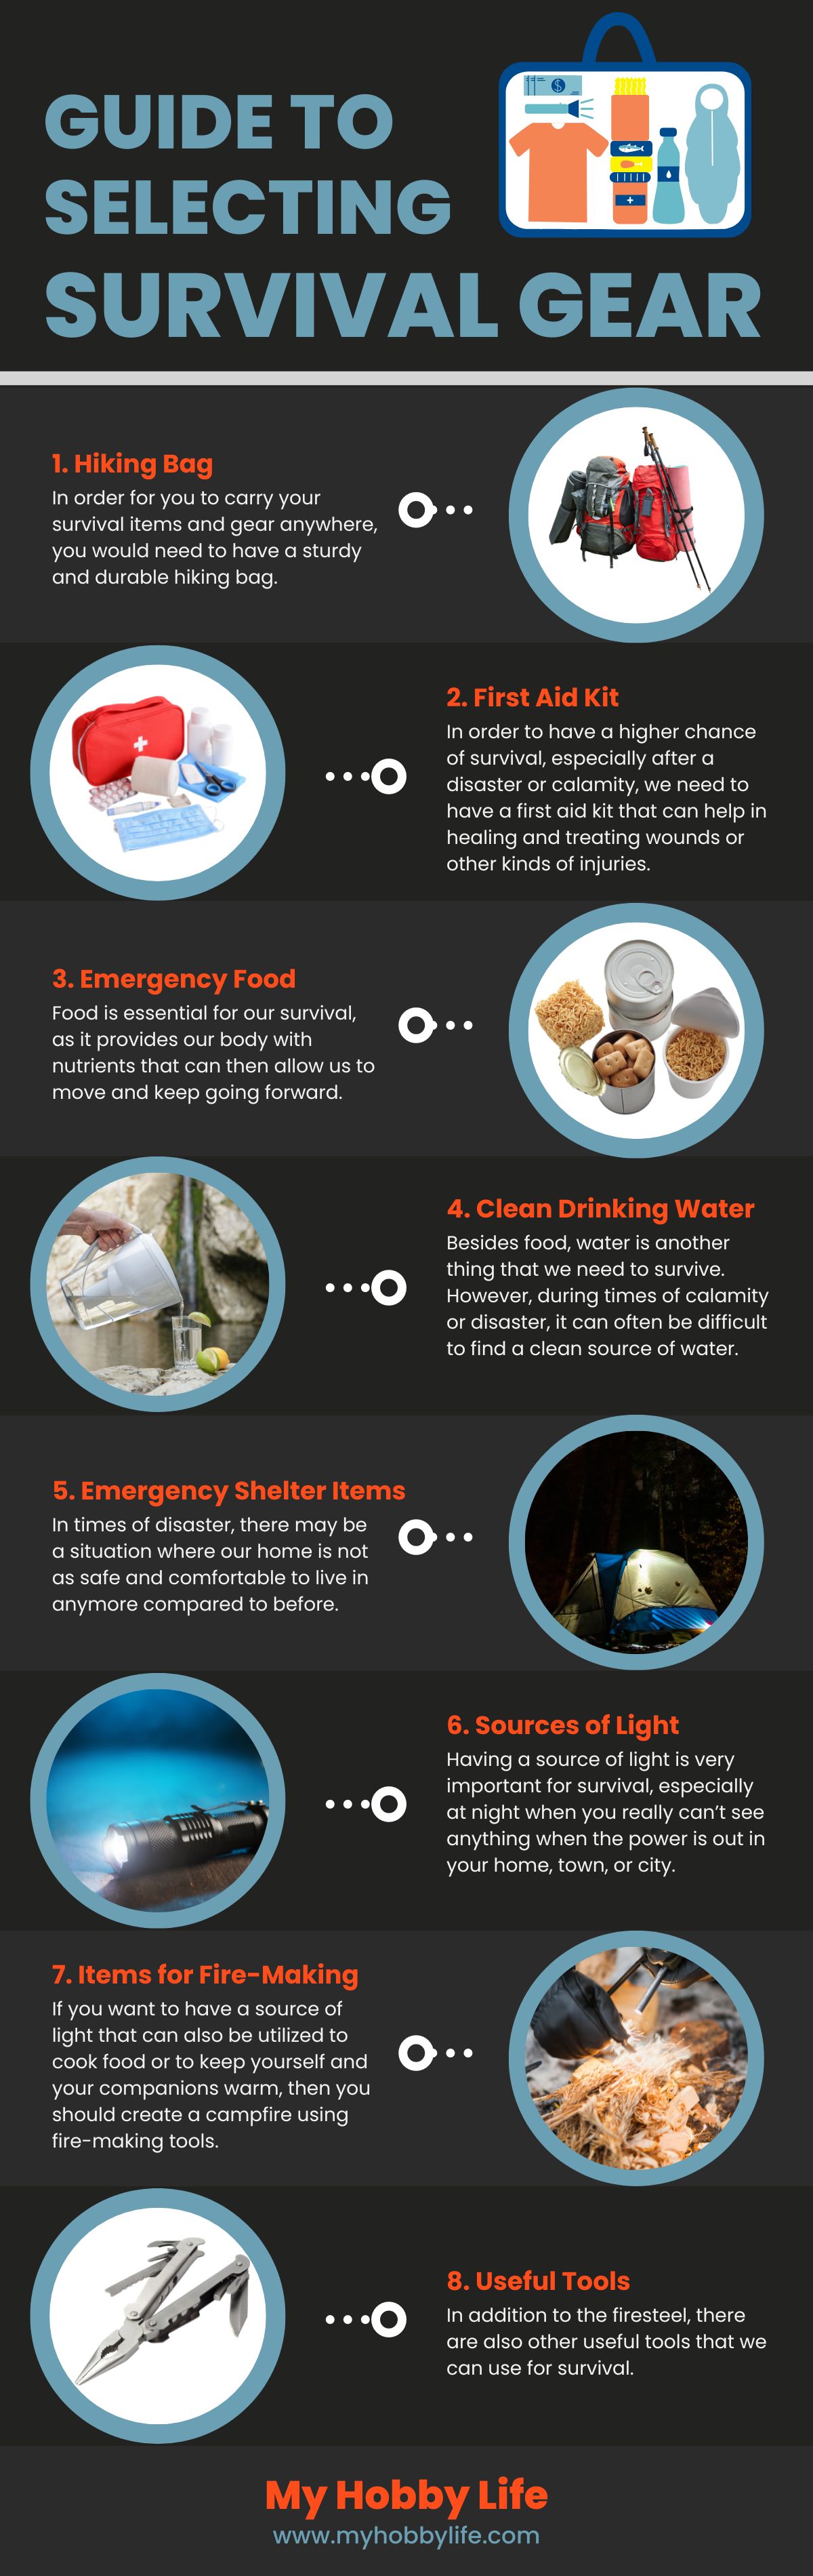 Selecting survival gear infographic